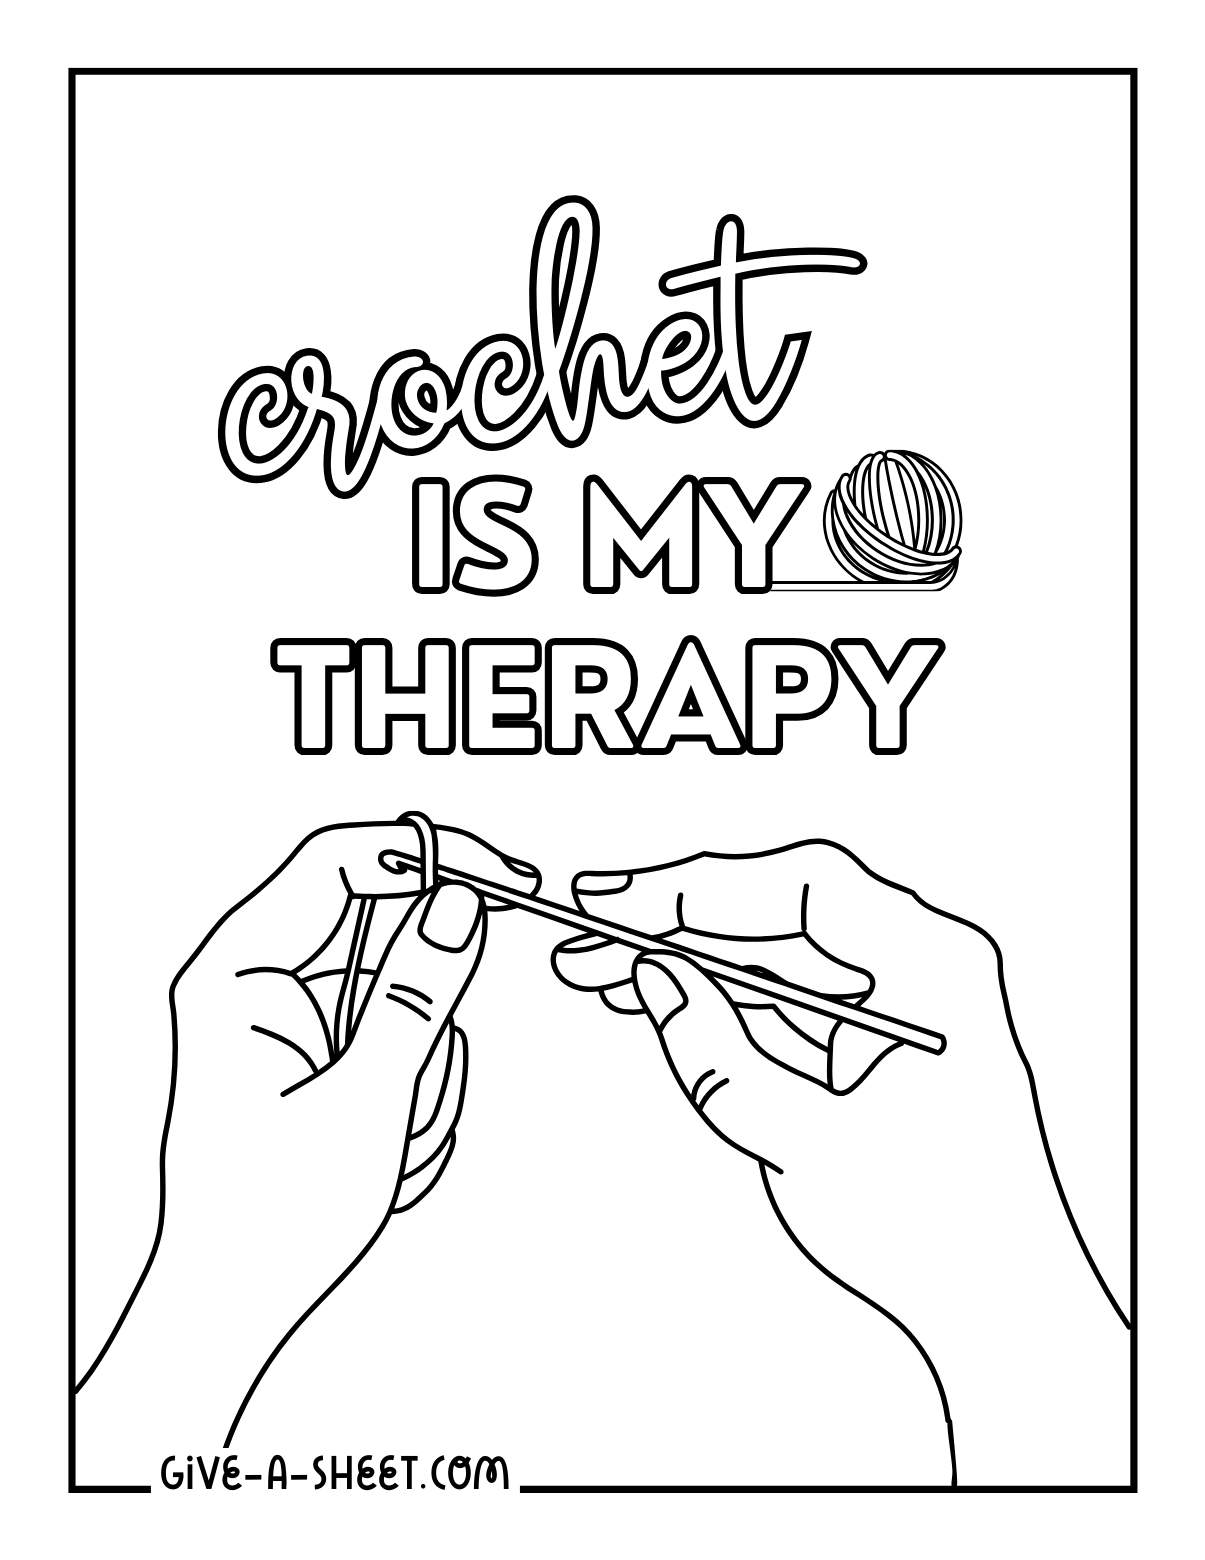 Crochet tapestry needlework coloring page.